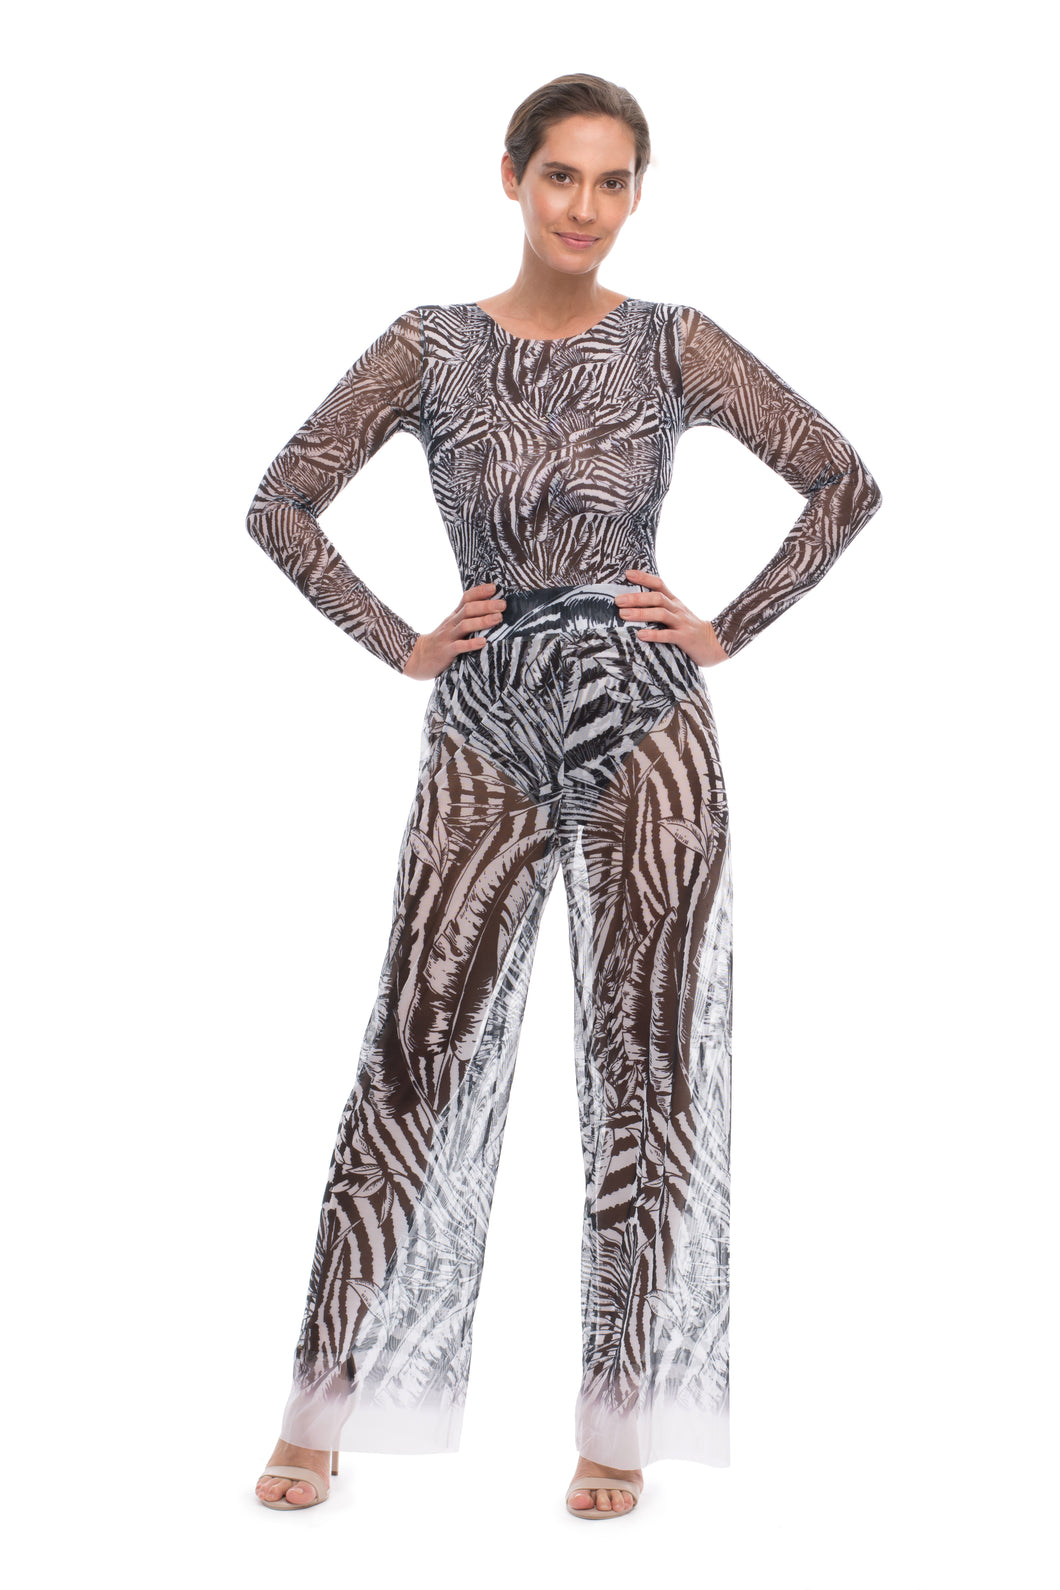 This file showcases sustainable tan-through smart swimsuits adorned with a trendy Fake Zebra print. Included are luxurious Beach Pants offering SPF35 protection for stylish sun safety.